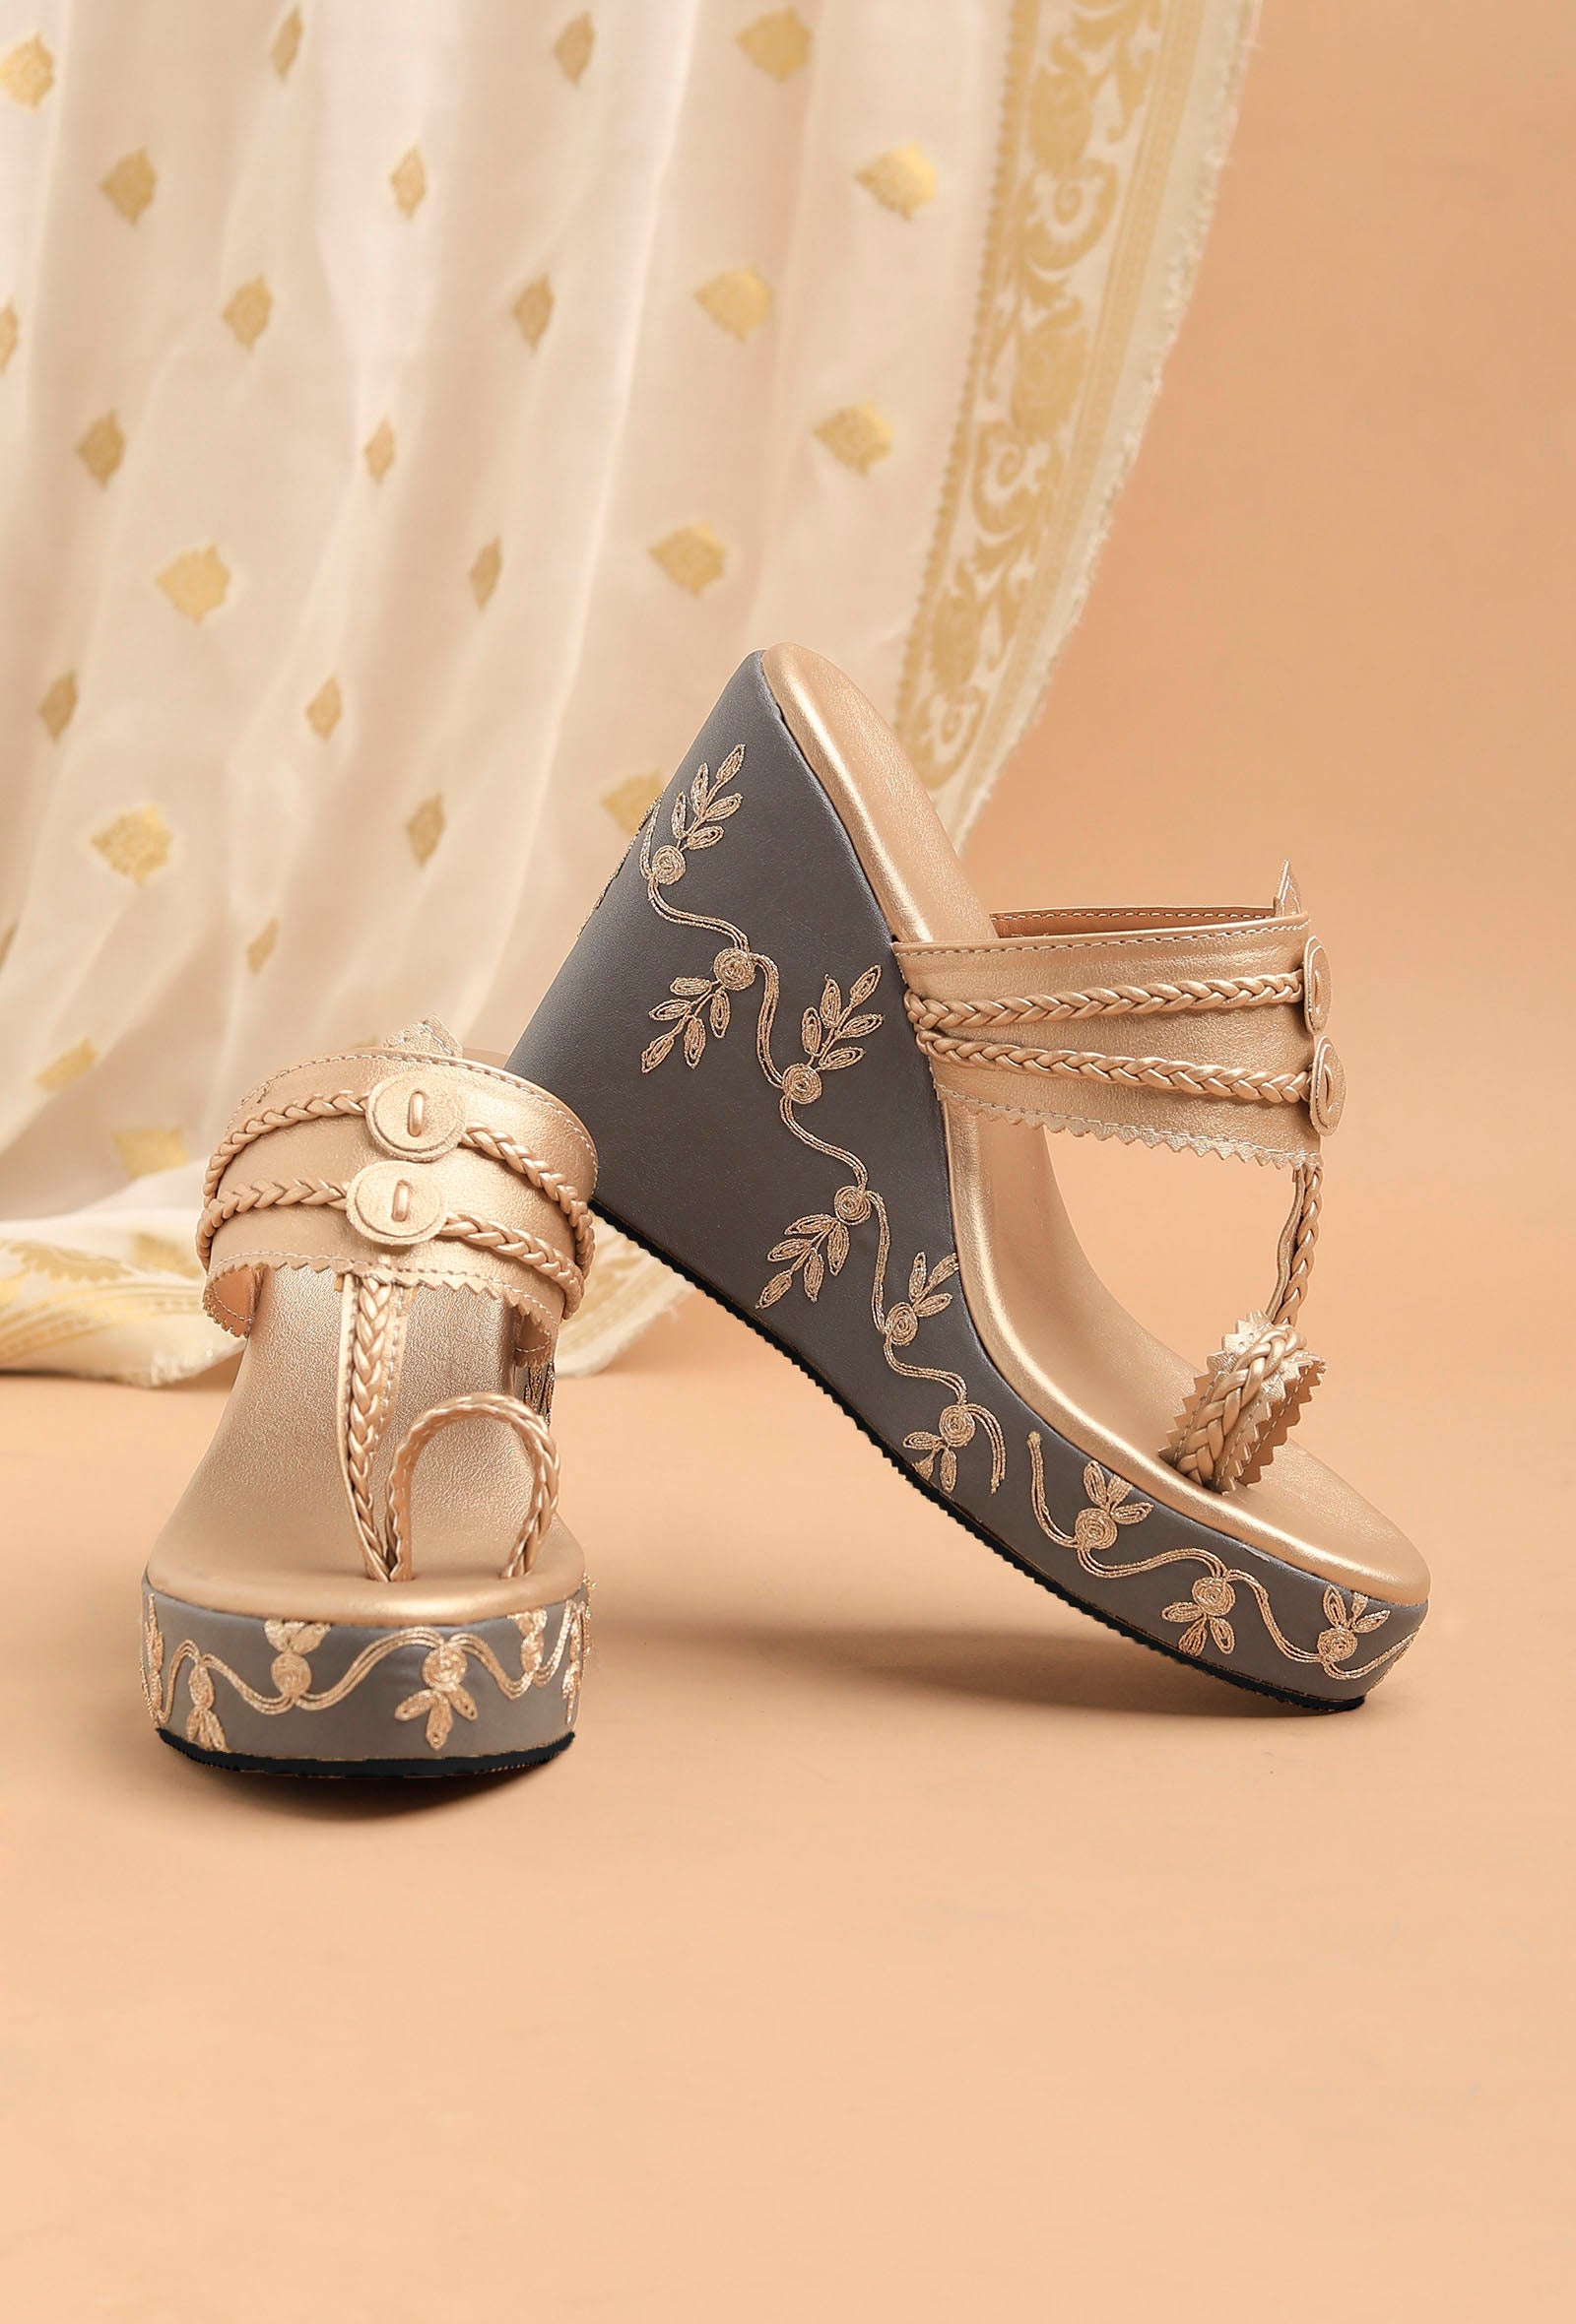 Refined Golden Hand Embroidered Kolhapuri Inspired Wedges